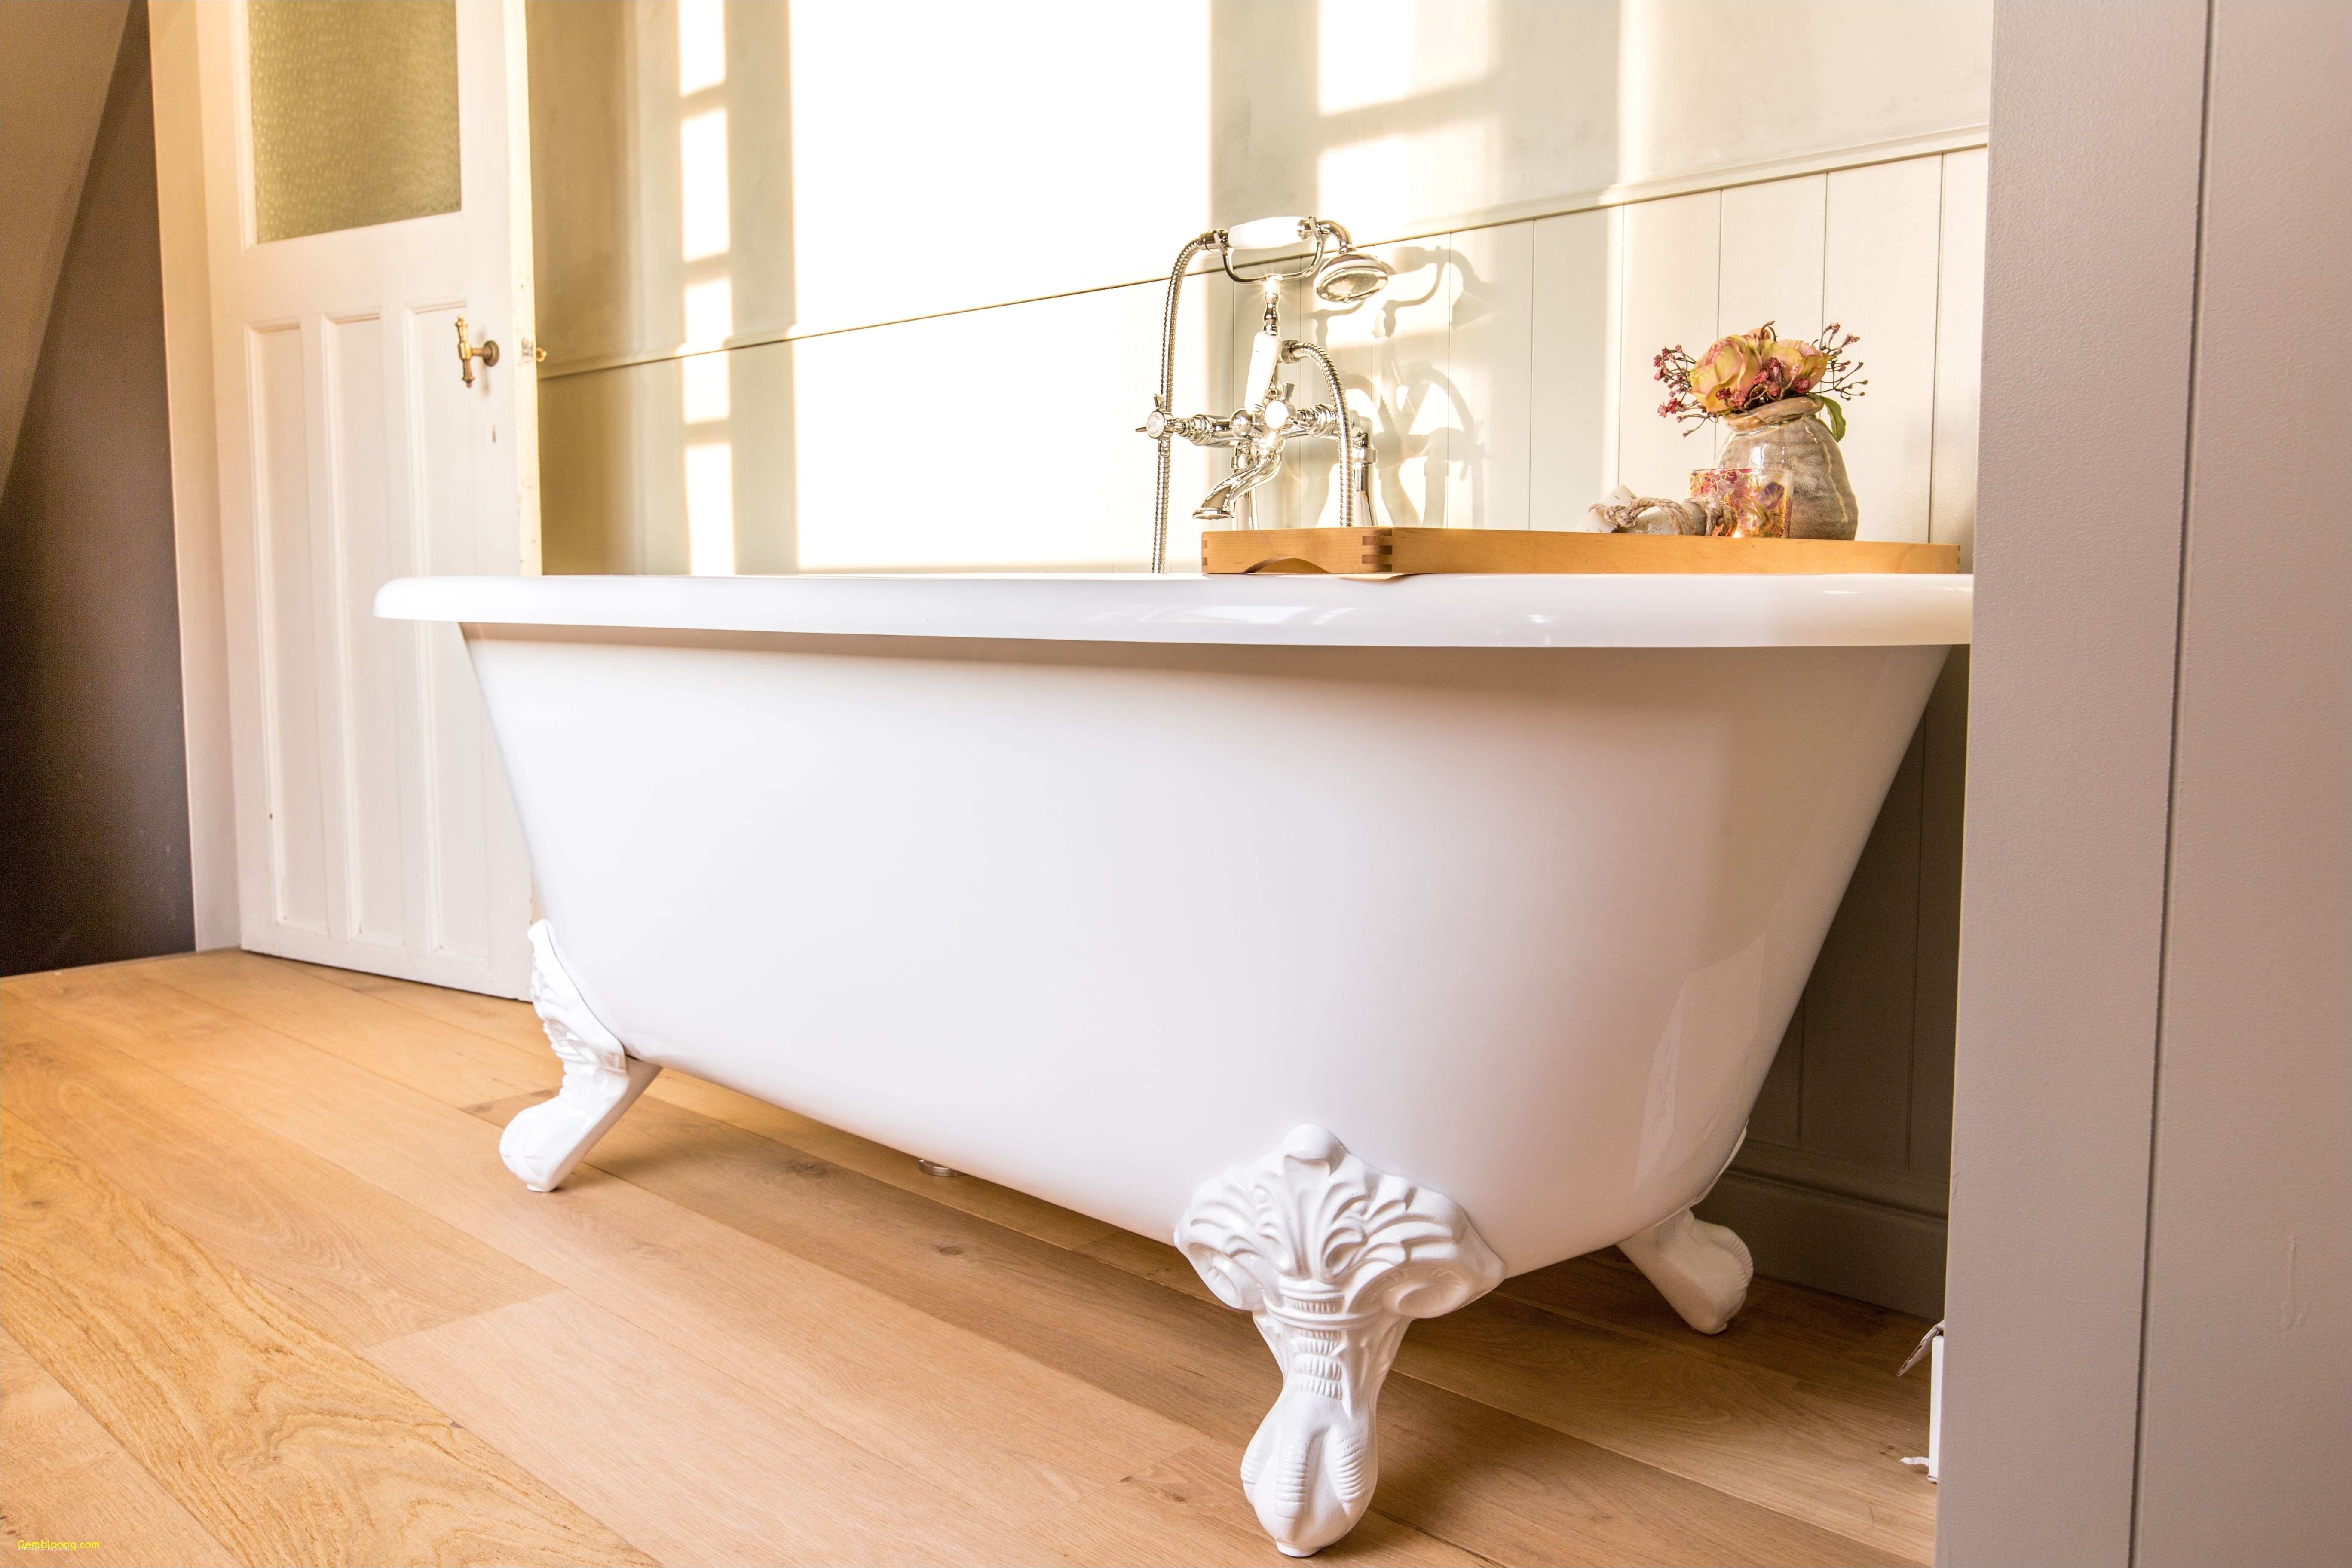 4 ft tub fortable 4 foot bathtub want a deep tub ly tub in the house